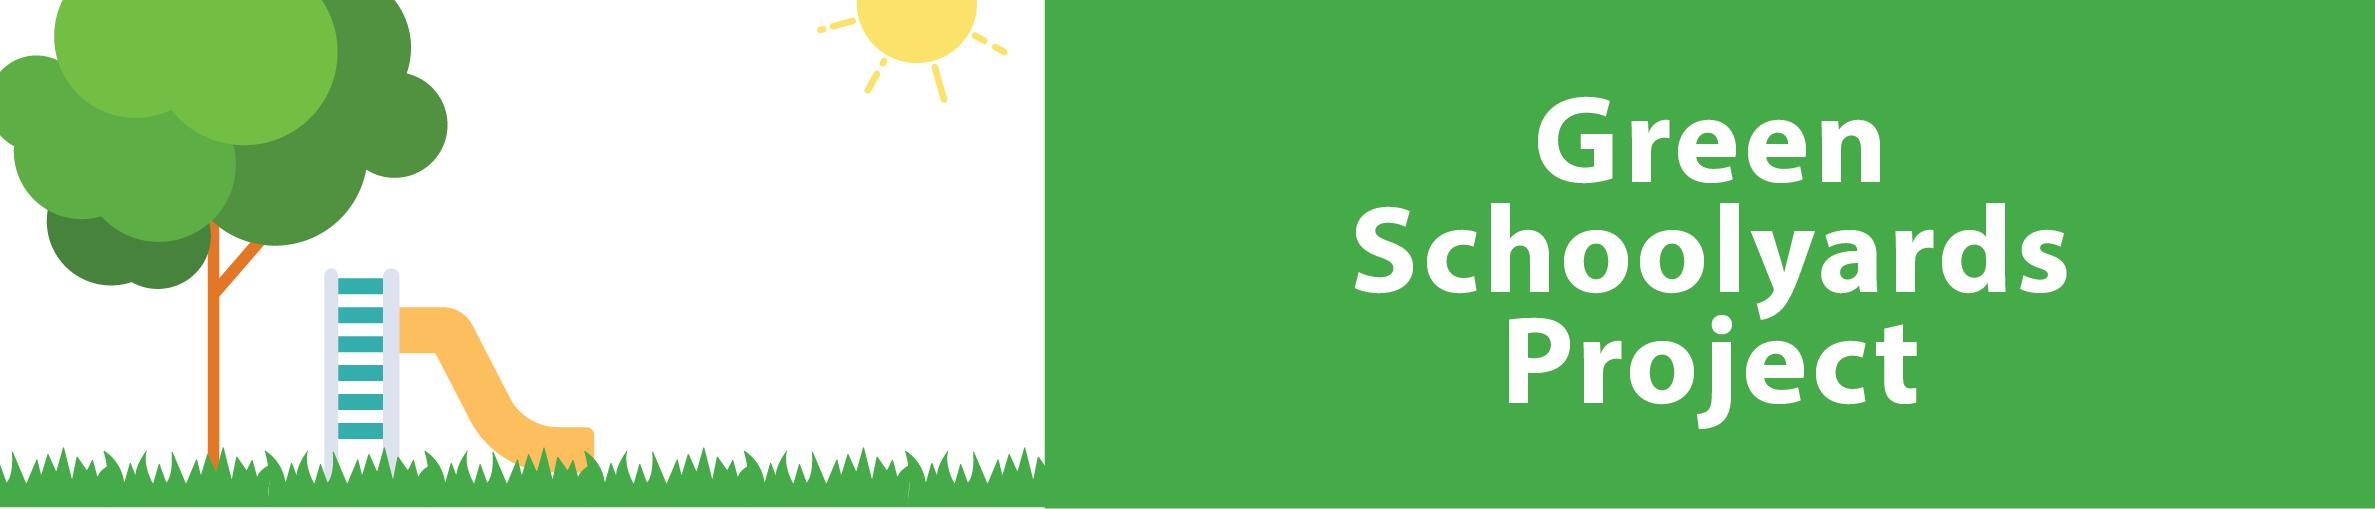 Banner image for Green Schoolyards Project